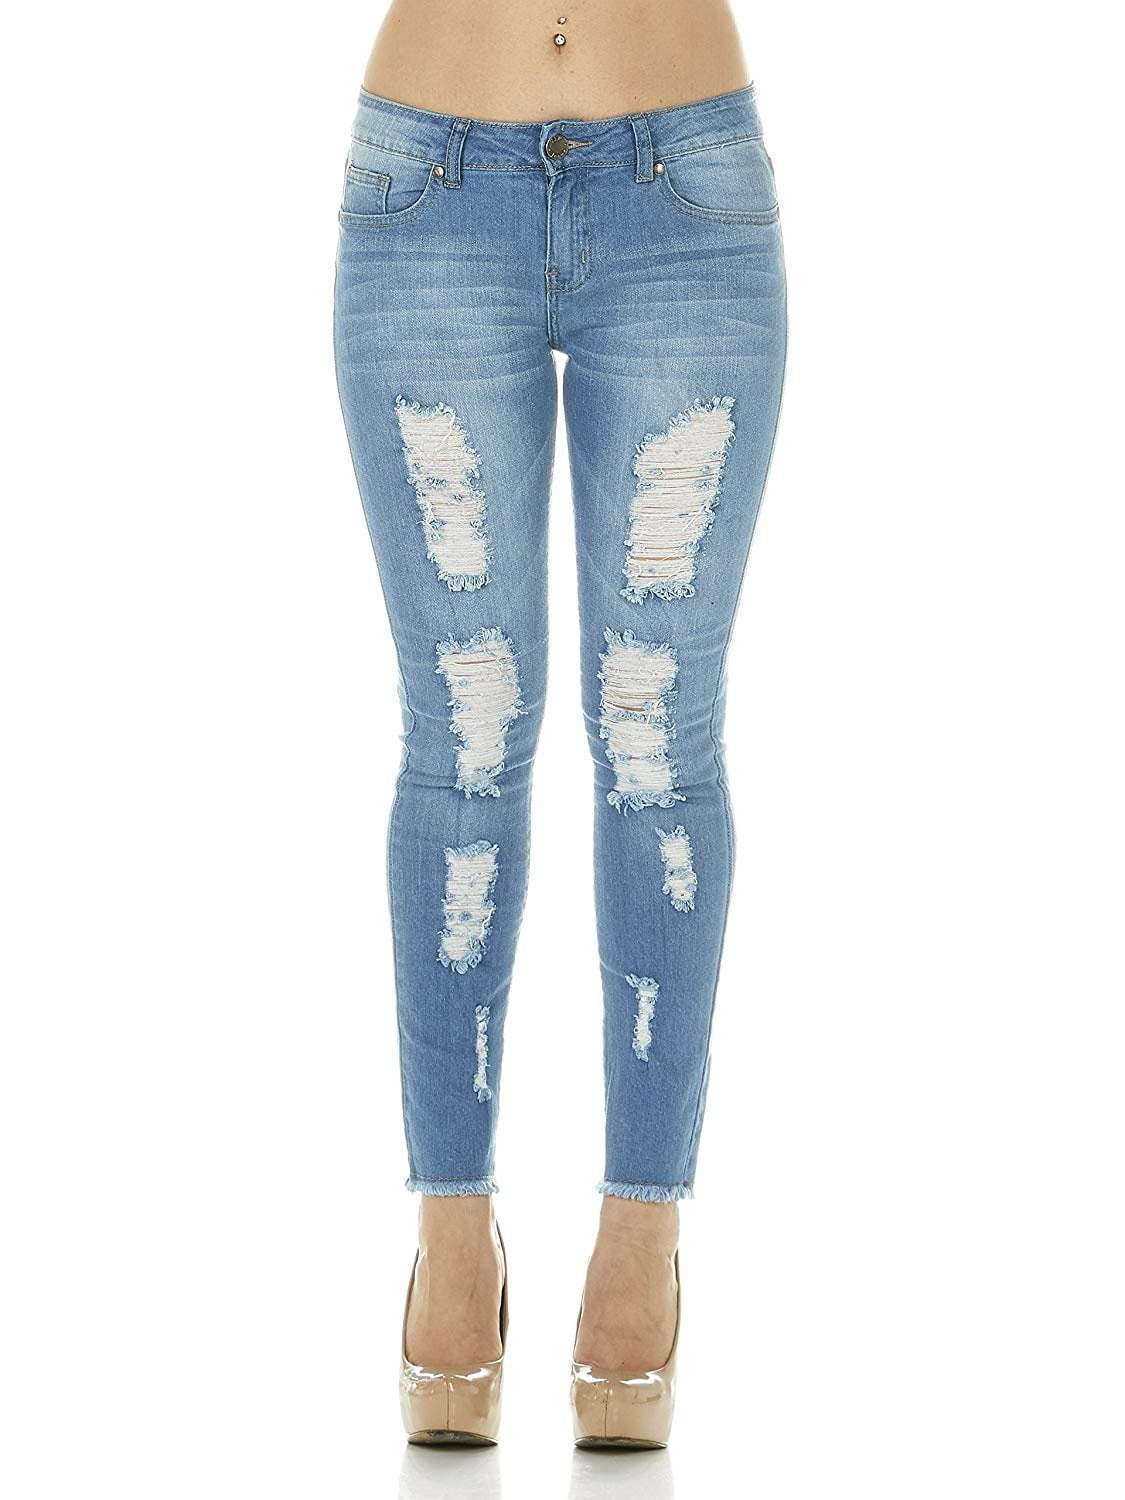 Cute Teen Girl Jeans juniors plus ripped repaired patched skinny pants ...